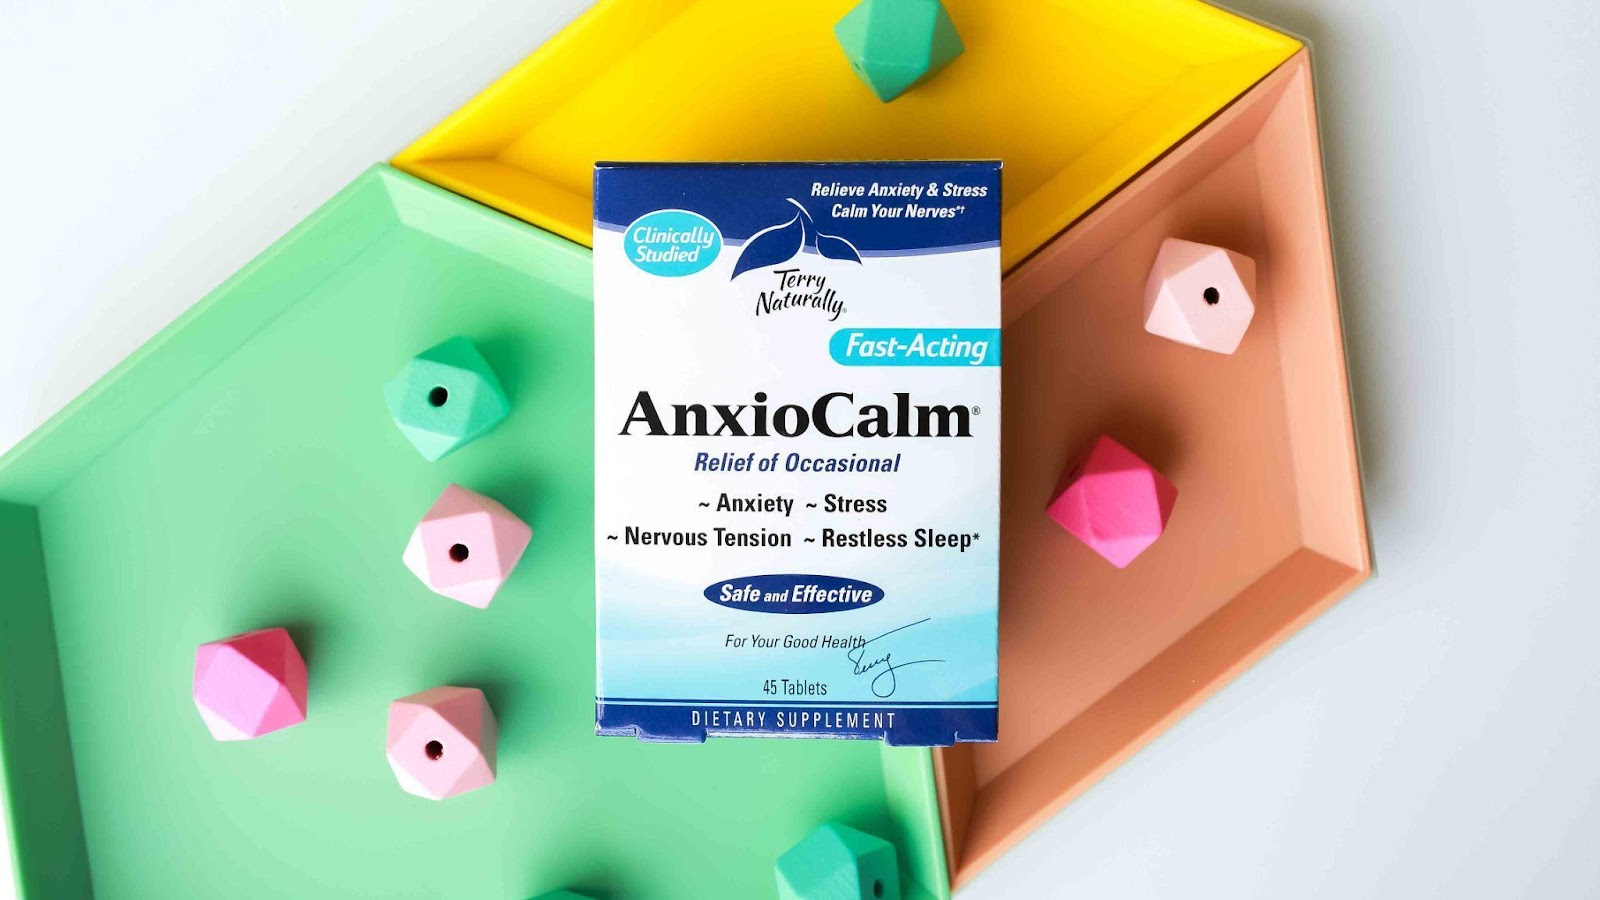 Stop your Stressing: The 4 Best Supplements for Stress & Anxiety 2